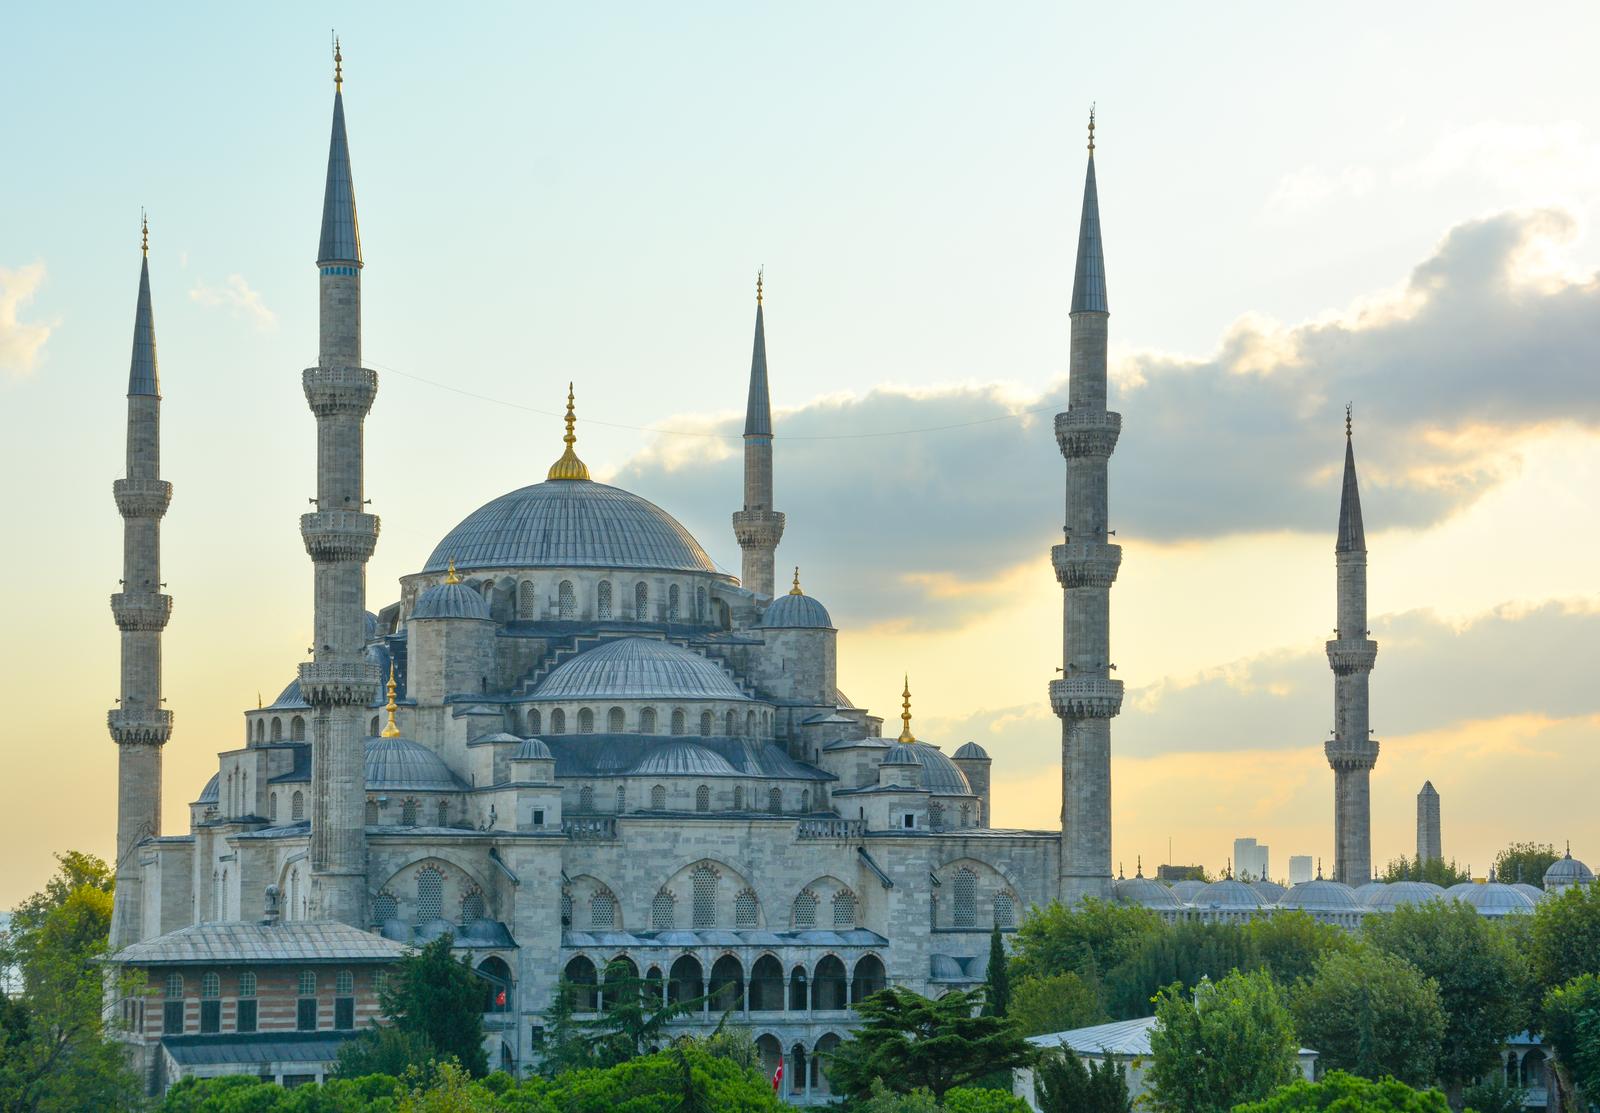 It’s That Easy — Get More Than 17/25 on This Geography Test to Win Istanbul, Turkey